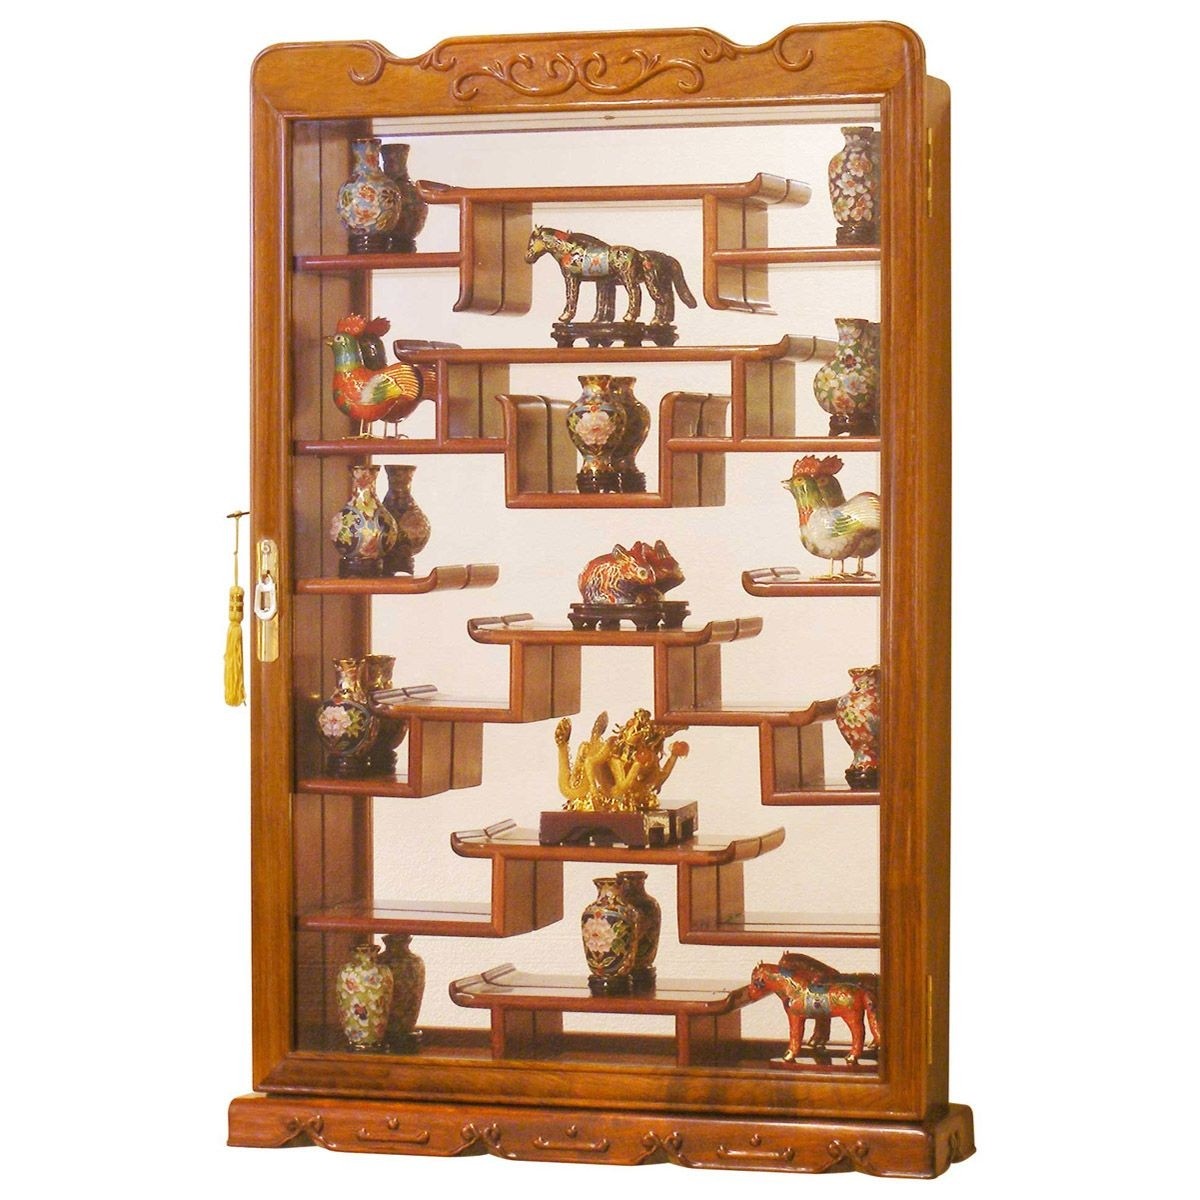 Rosewood wall curio display cabinet asian accessories and decor